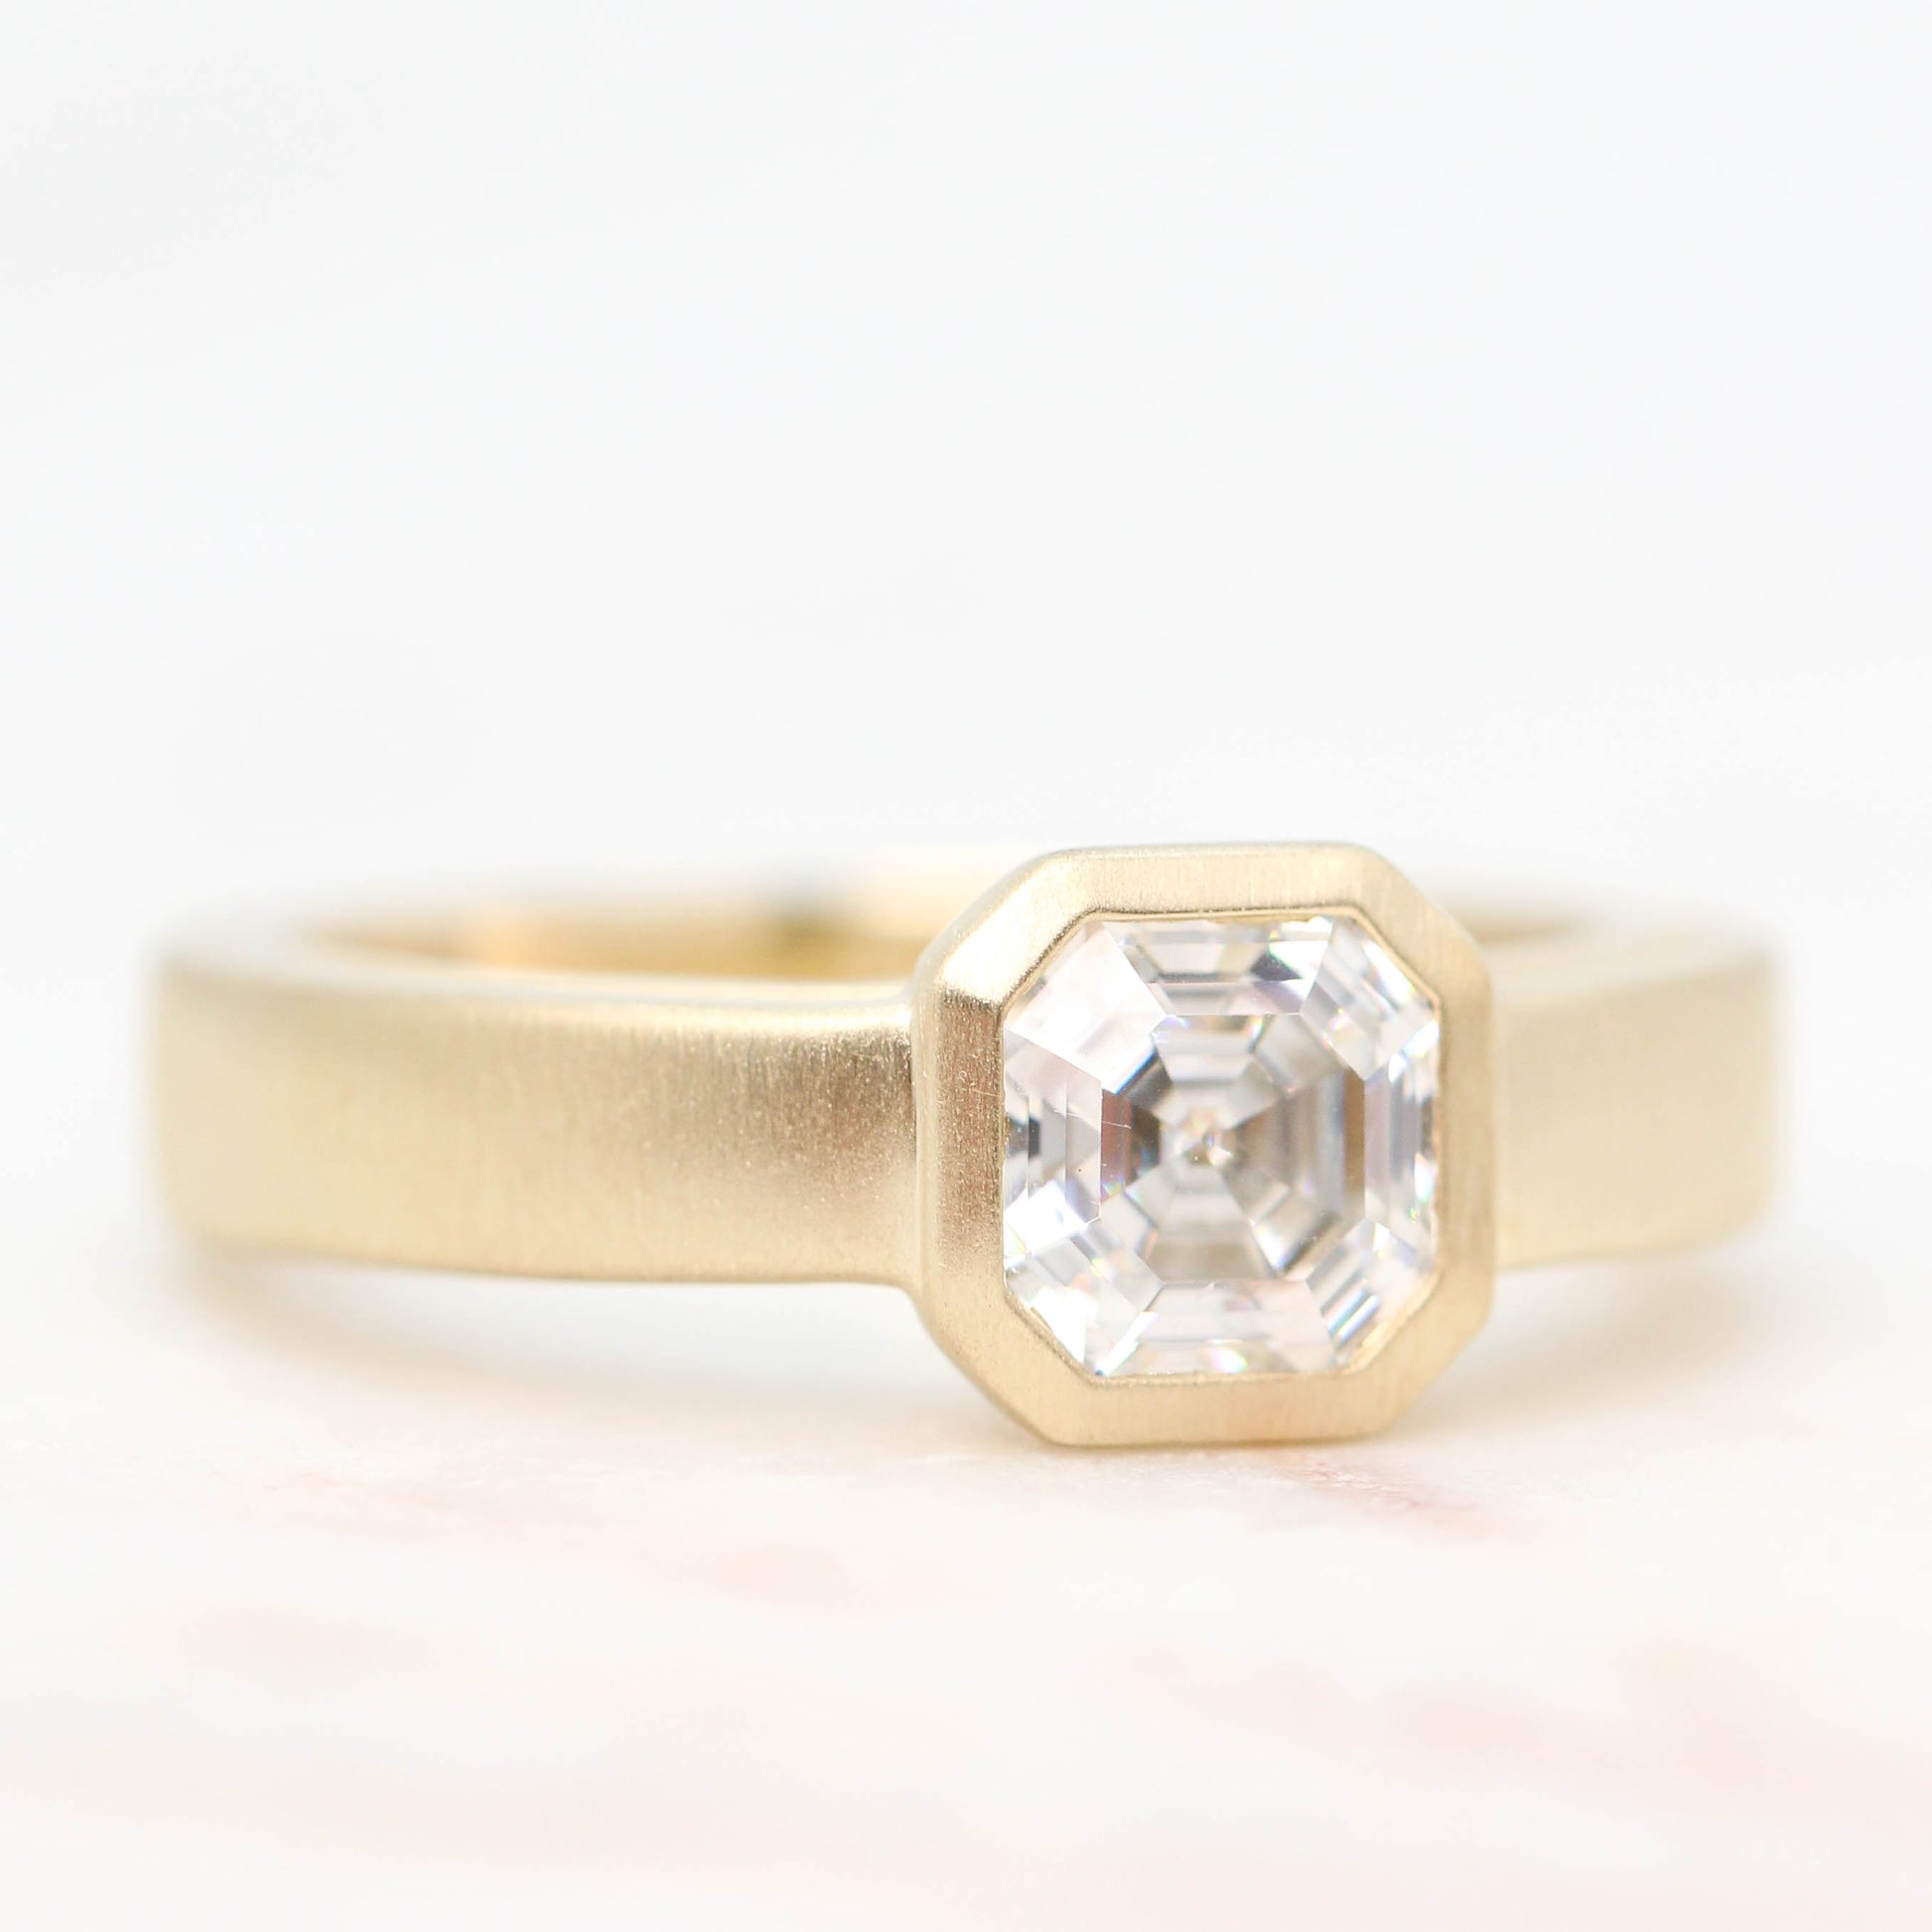 Mabel Bezel Asscher Cut Unisex Band Ring - Made to Order, Choose Your Gold Tone - Midwinter Co. Alternative Bridal Rings and Modern Fine Jewelry